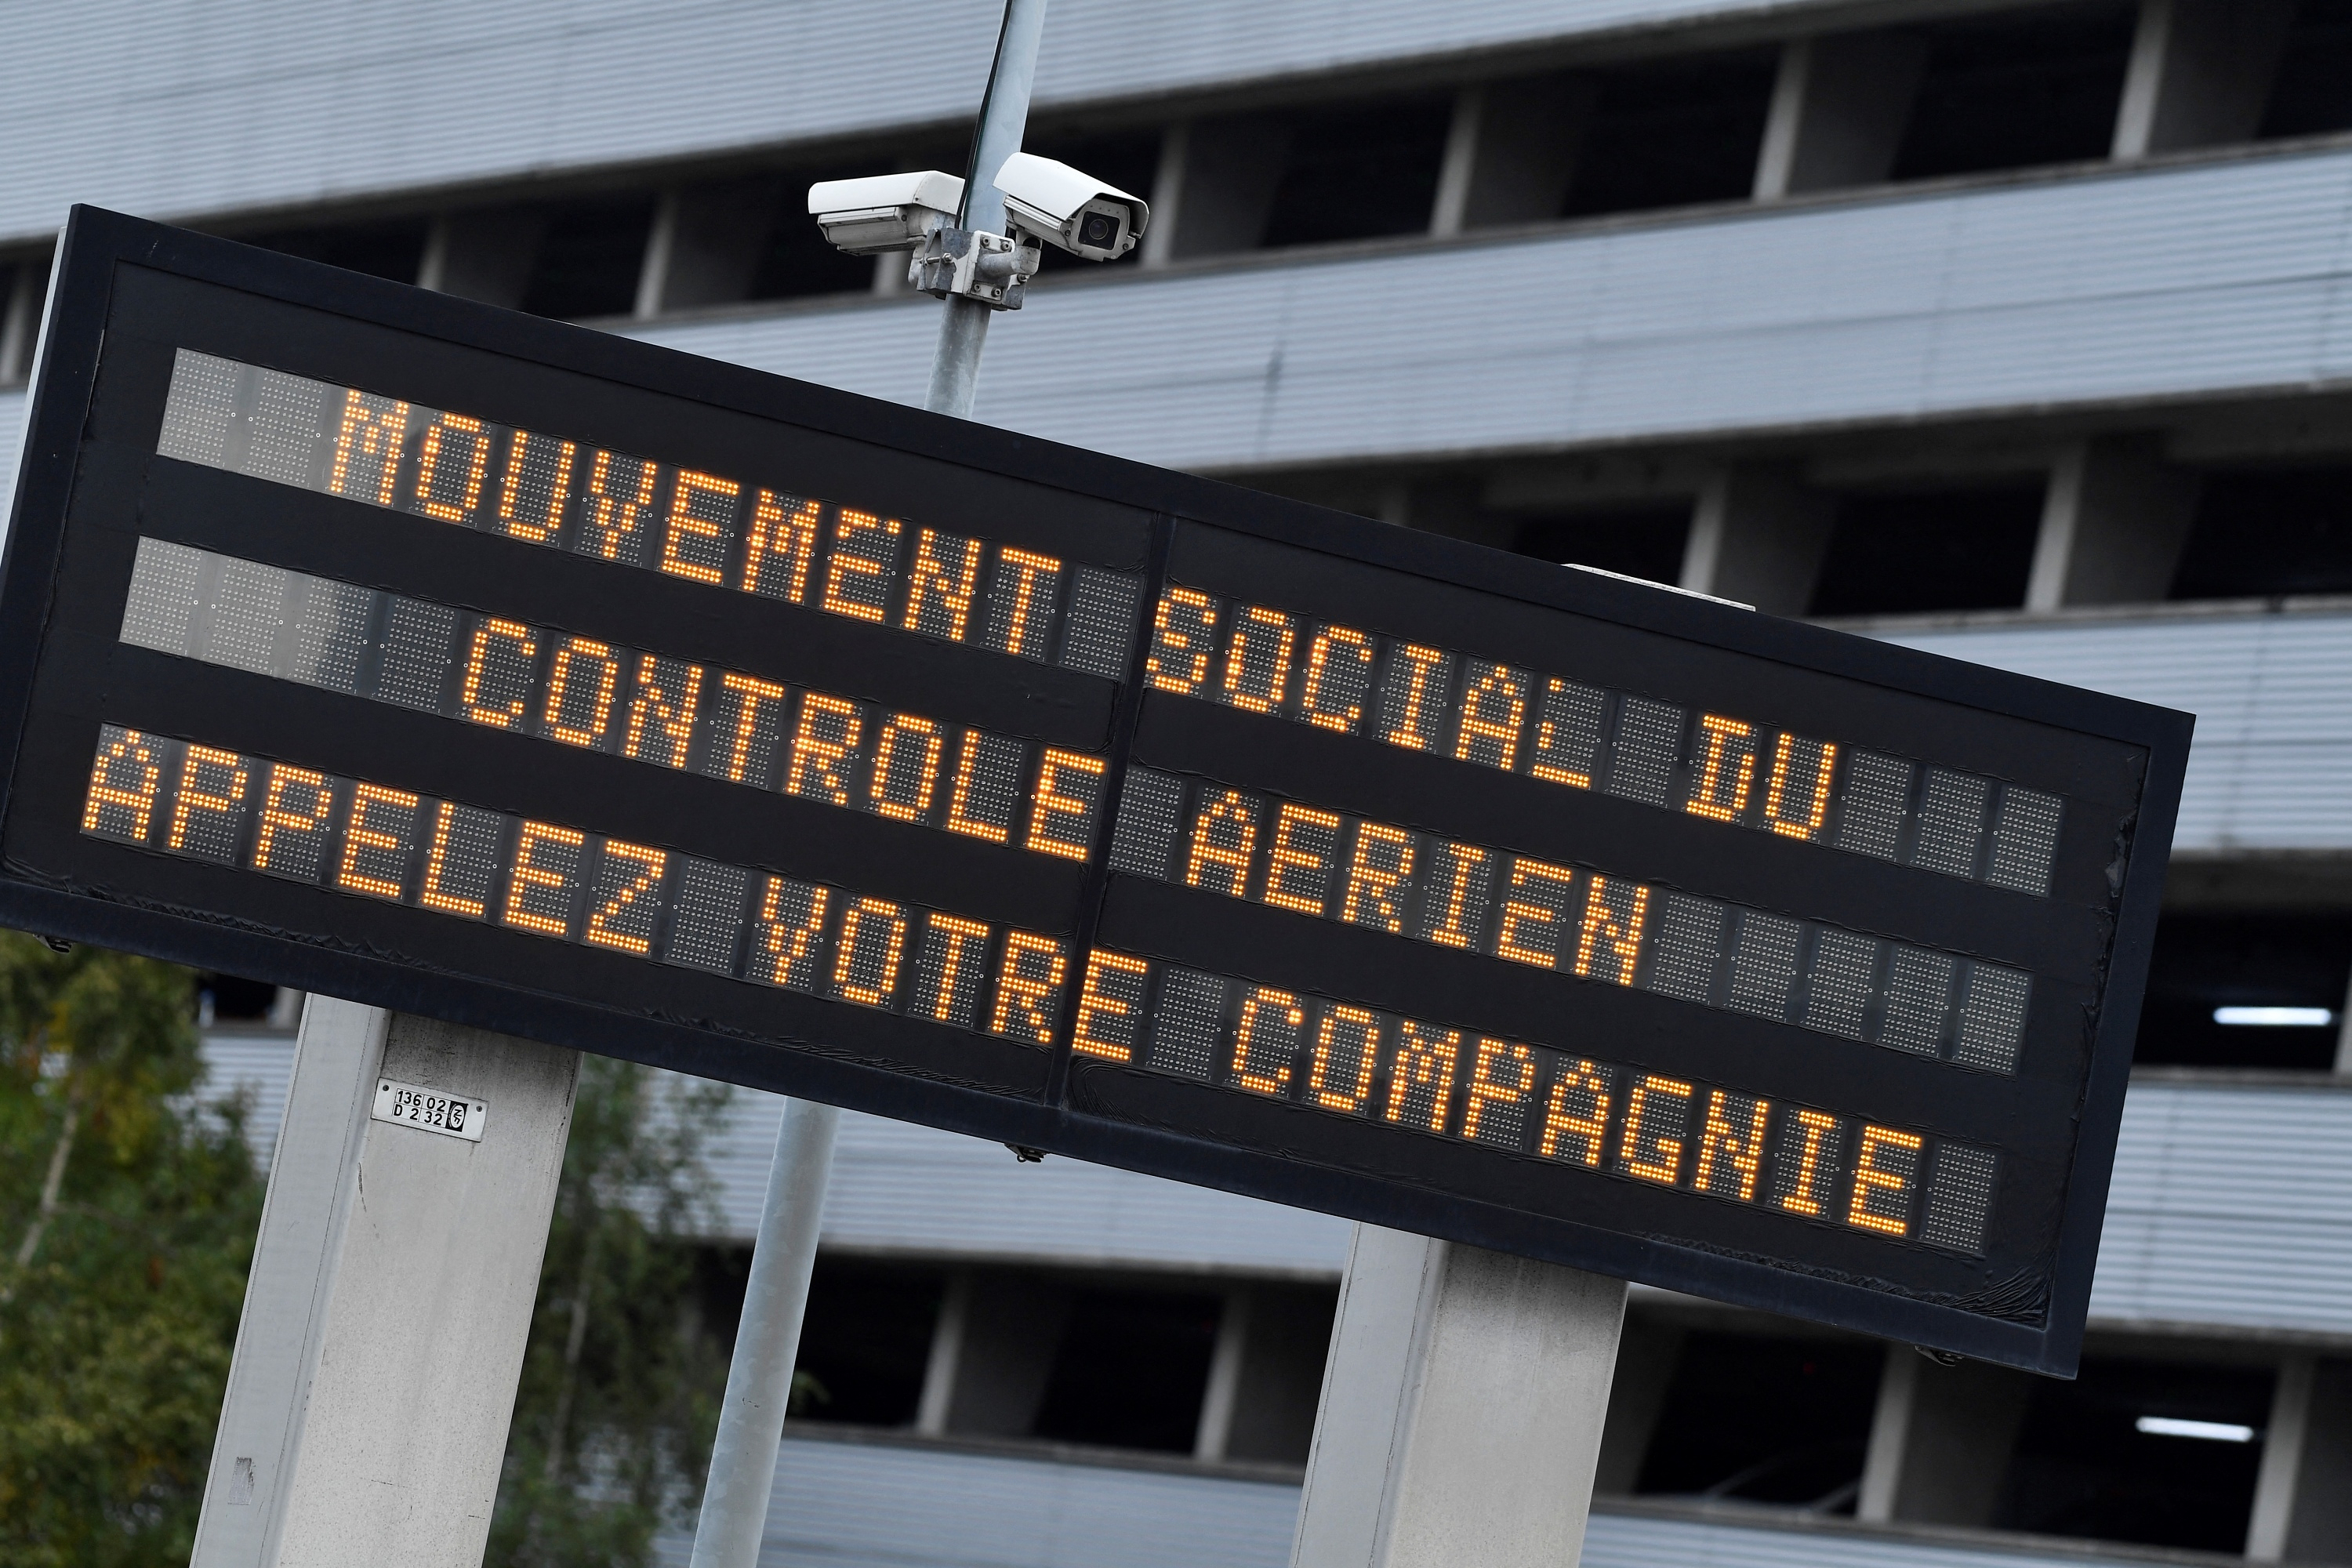 Air traffic controllers strike: 75% of flights canceled at Orly on Thursday, 65% at Roissy and Marseille